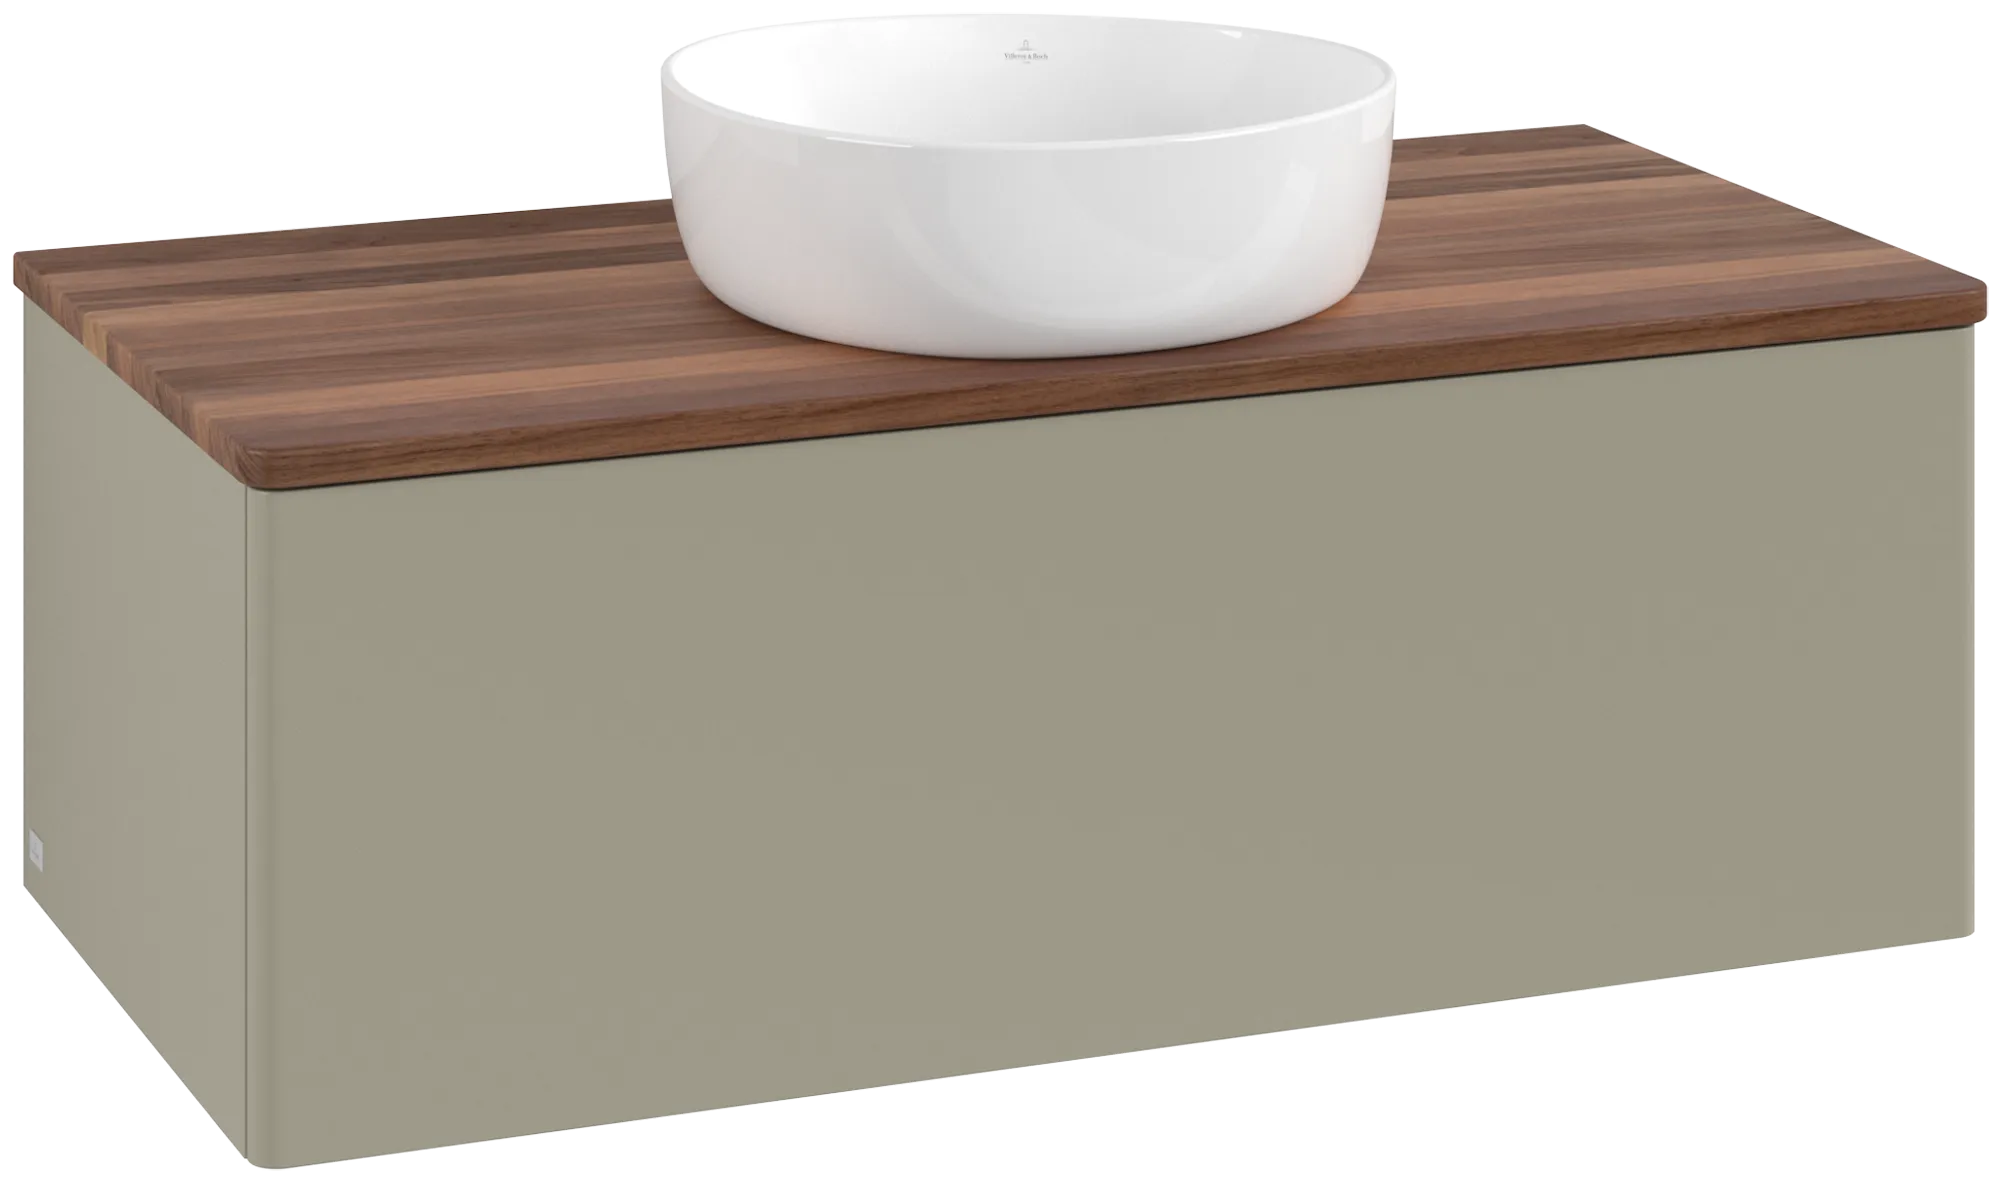 Obrázek VILLEROY BOCH Antao Vanity unit, 1 pull-out compartment, 1000 x 360 x 500 mm, Front without structure, Stone Grey Matt Lacquer / Warm Walnut #K31012HK